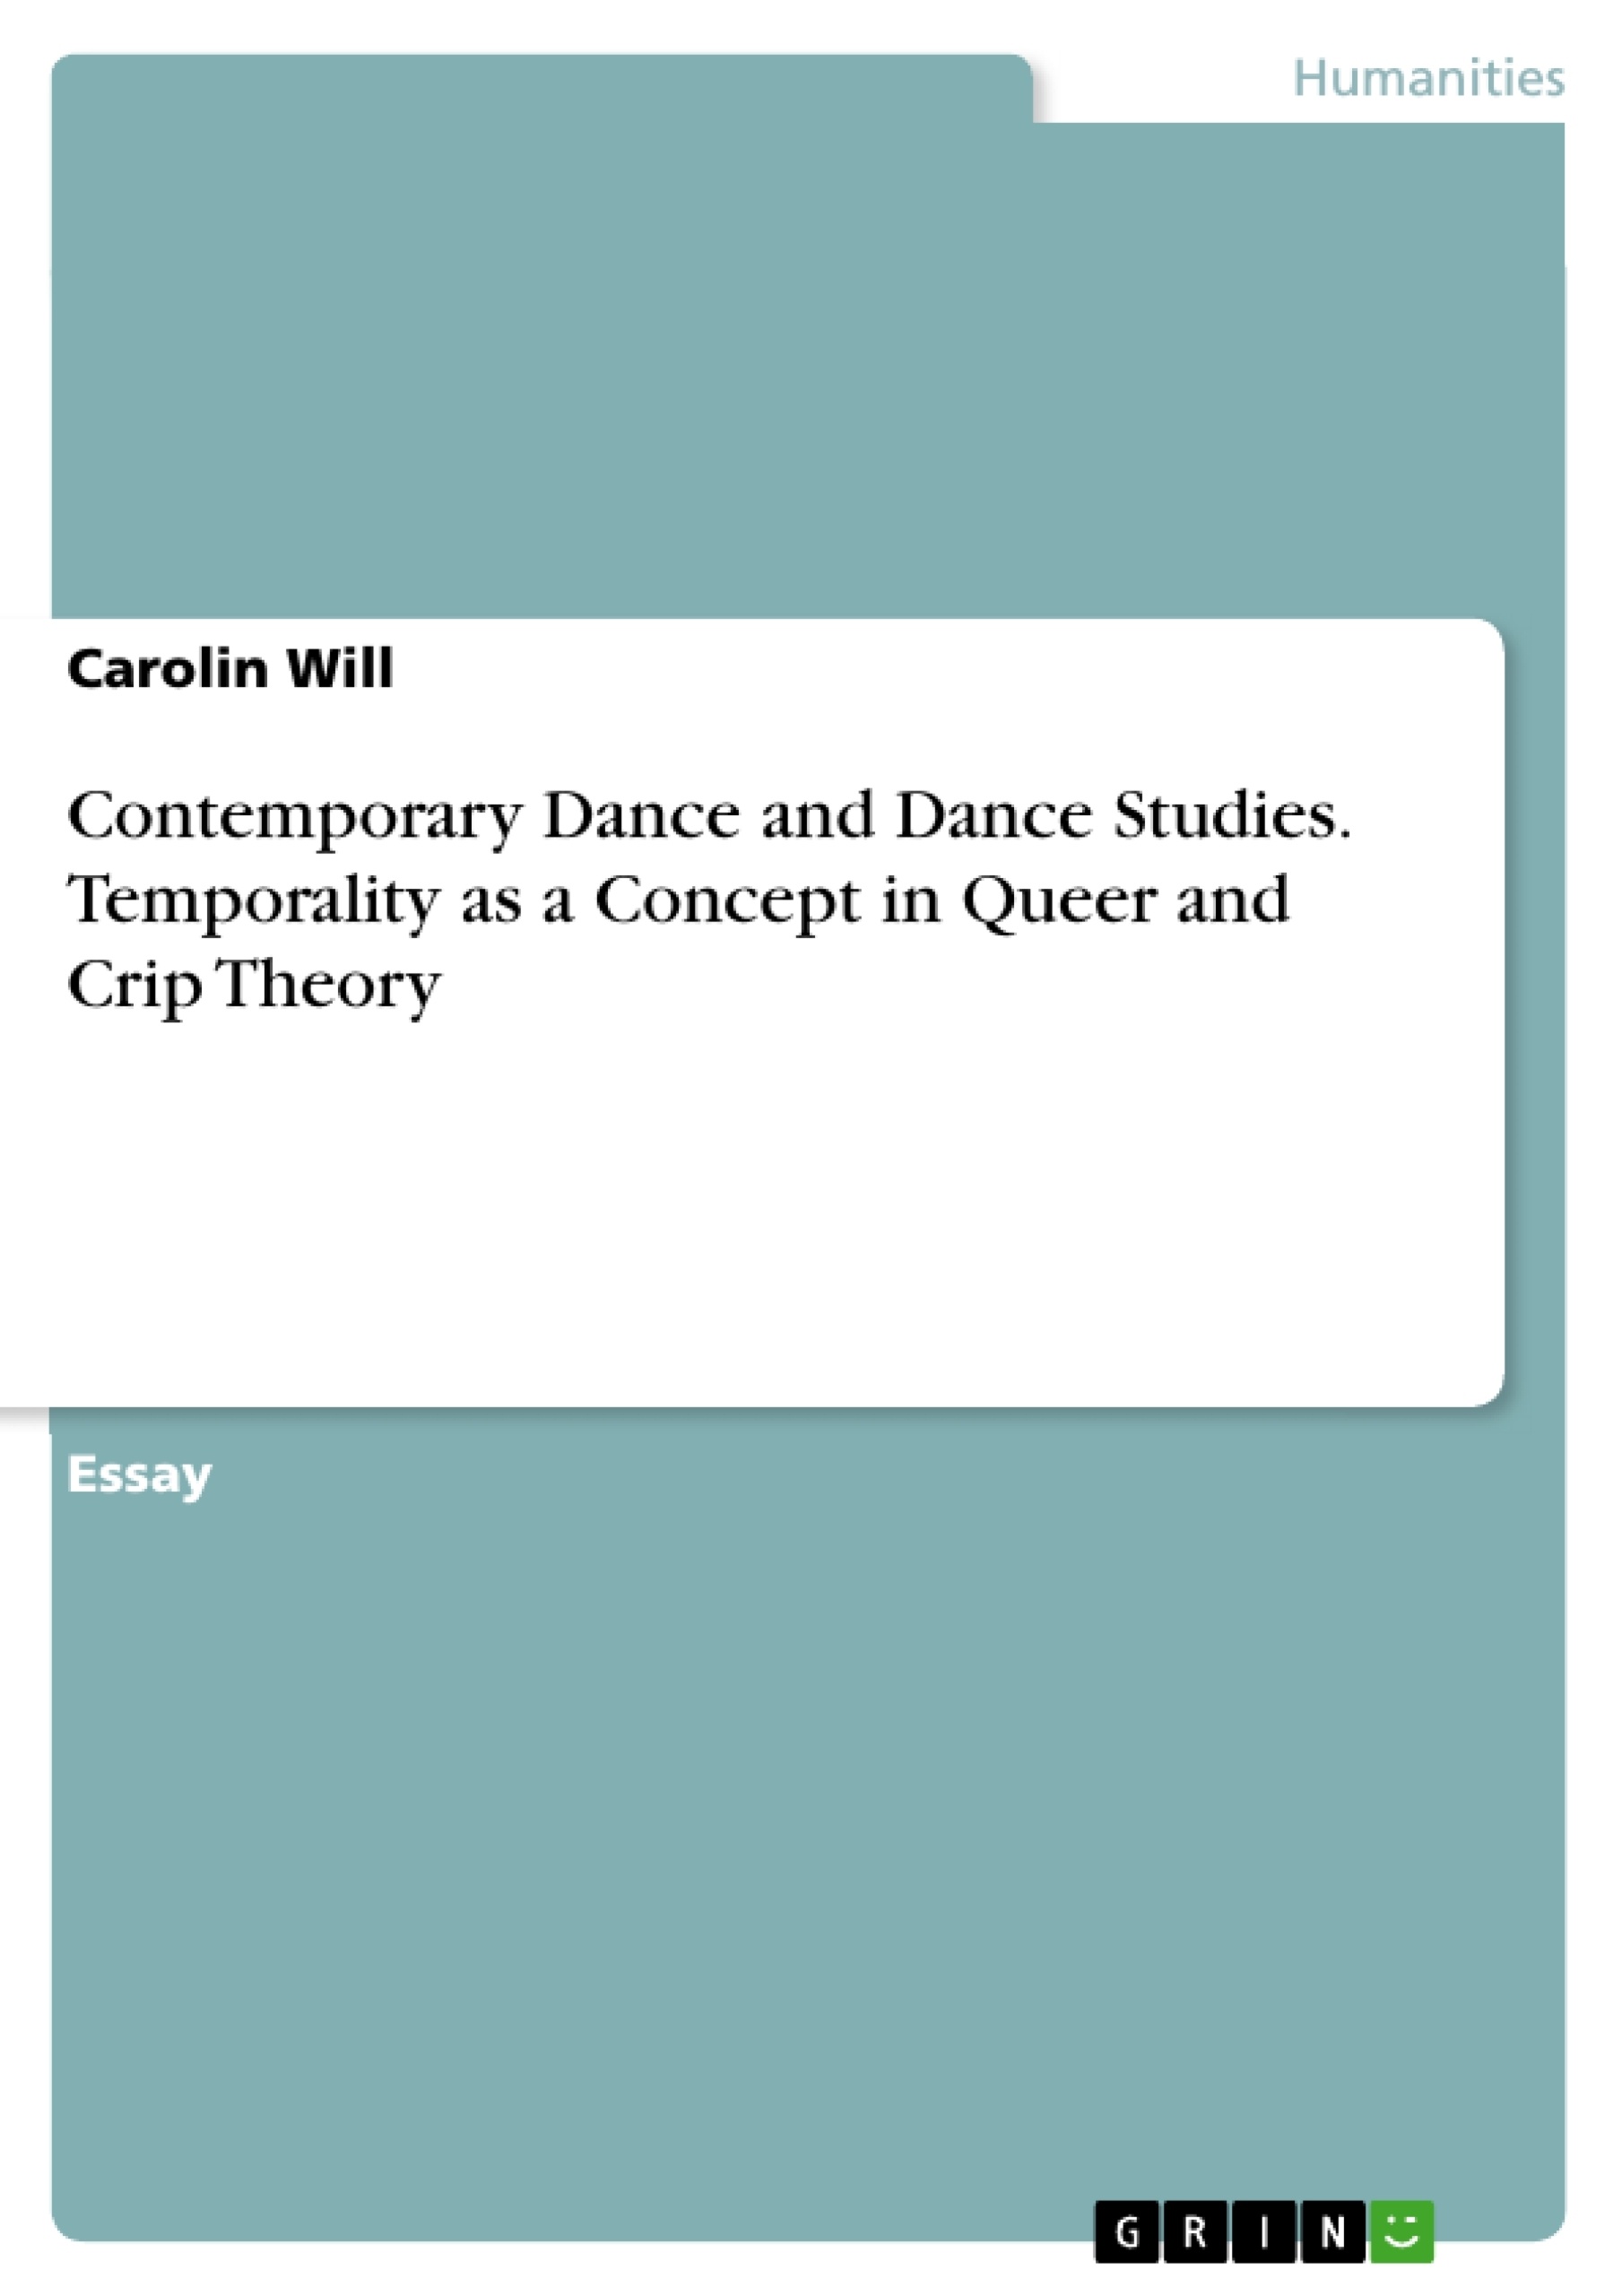 Título: Contemporary Dance and Dance Studies. Temporality as a Concept in Queer and Crip Theory